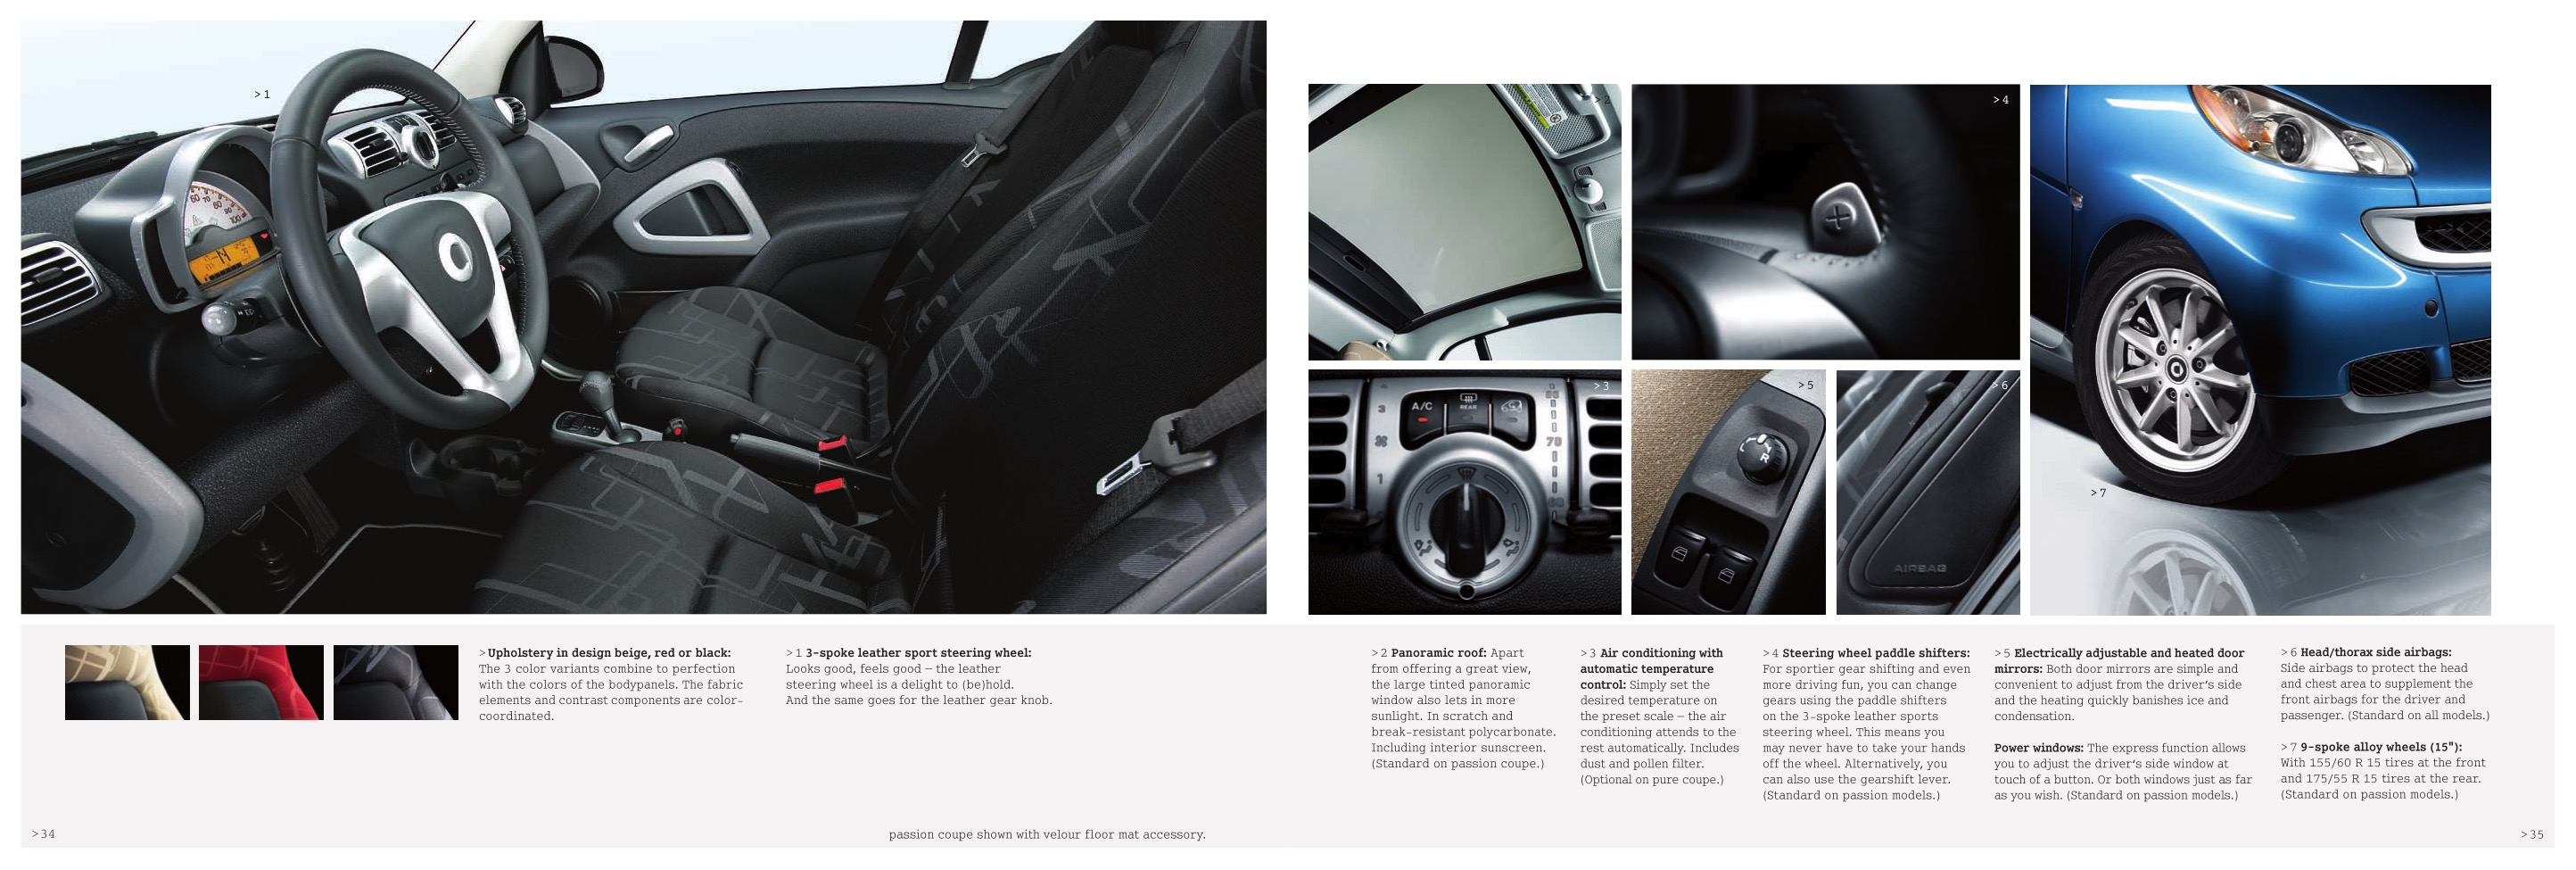 2009 Smart Fortwo Brochure Page 21